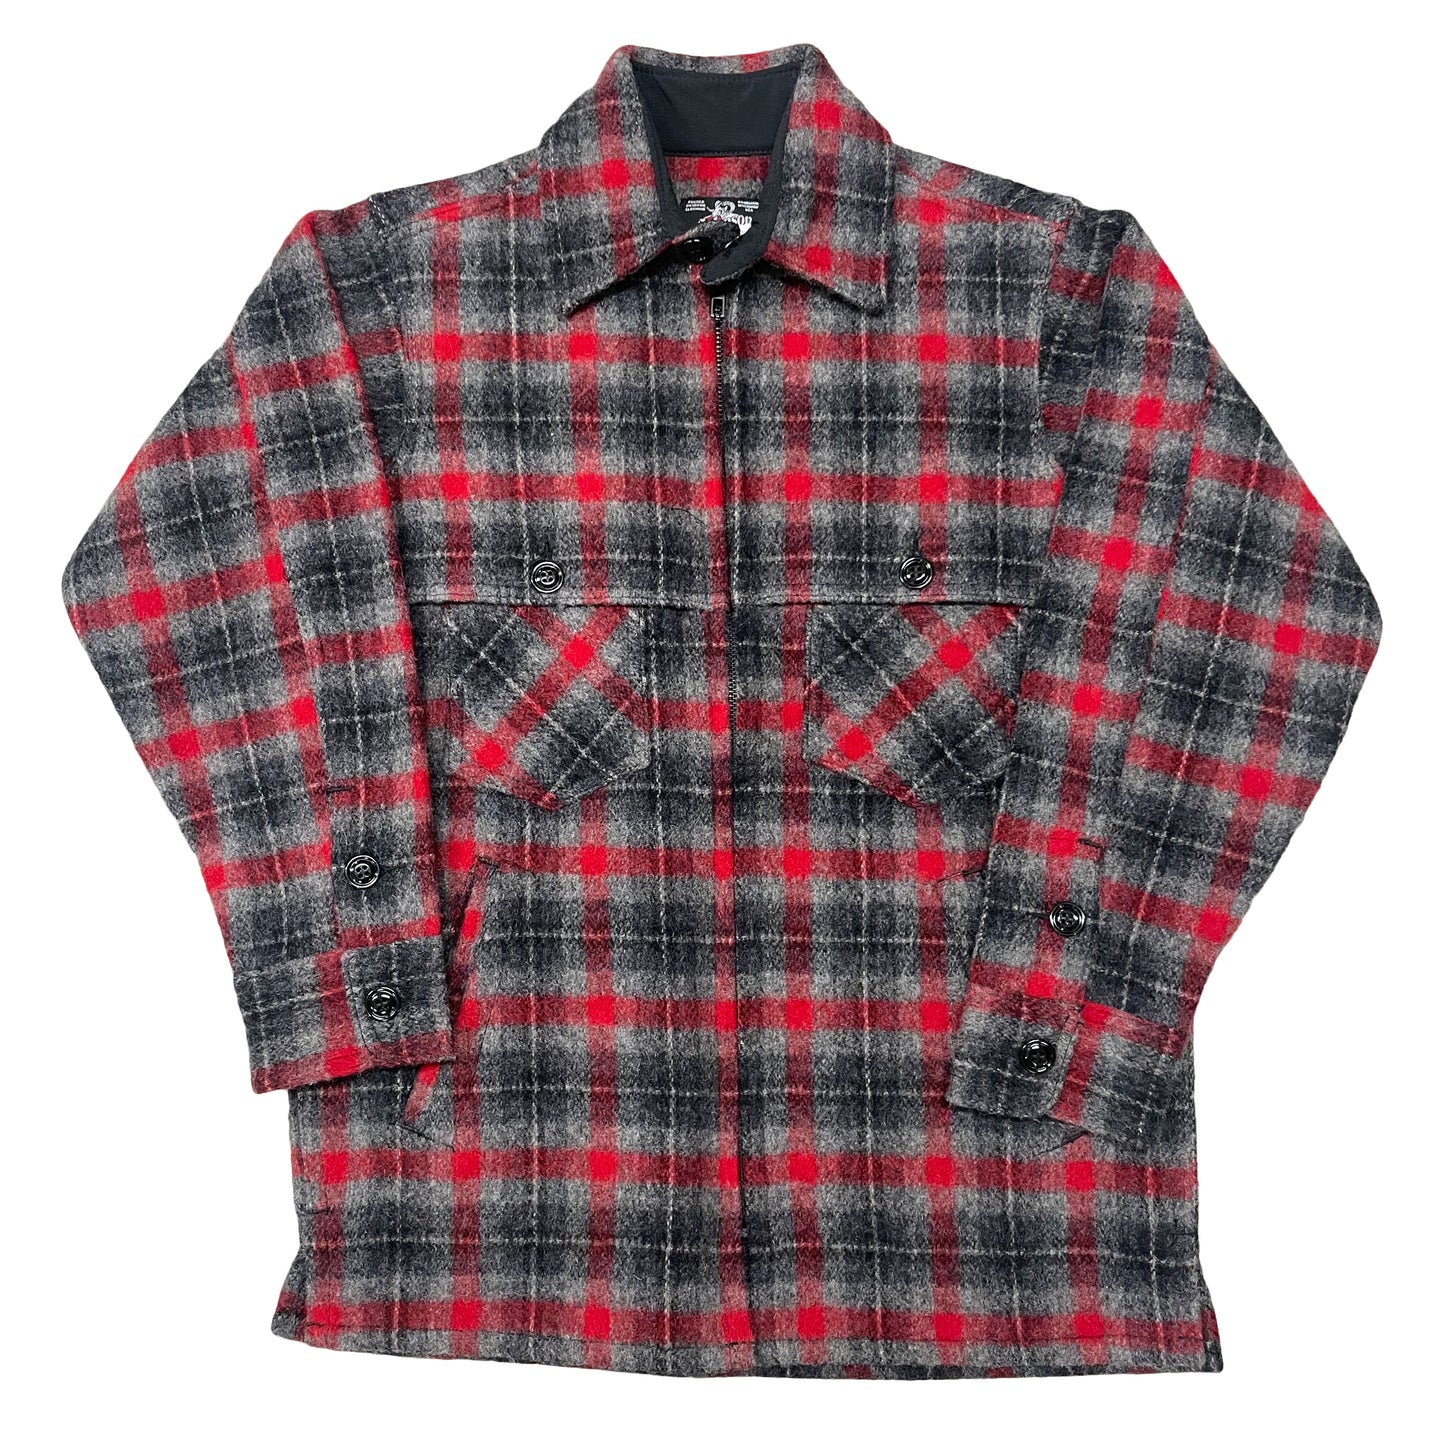 Double cape Wool Jac Shirt Full zip, gray and red window pane plaid